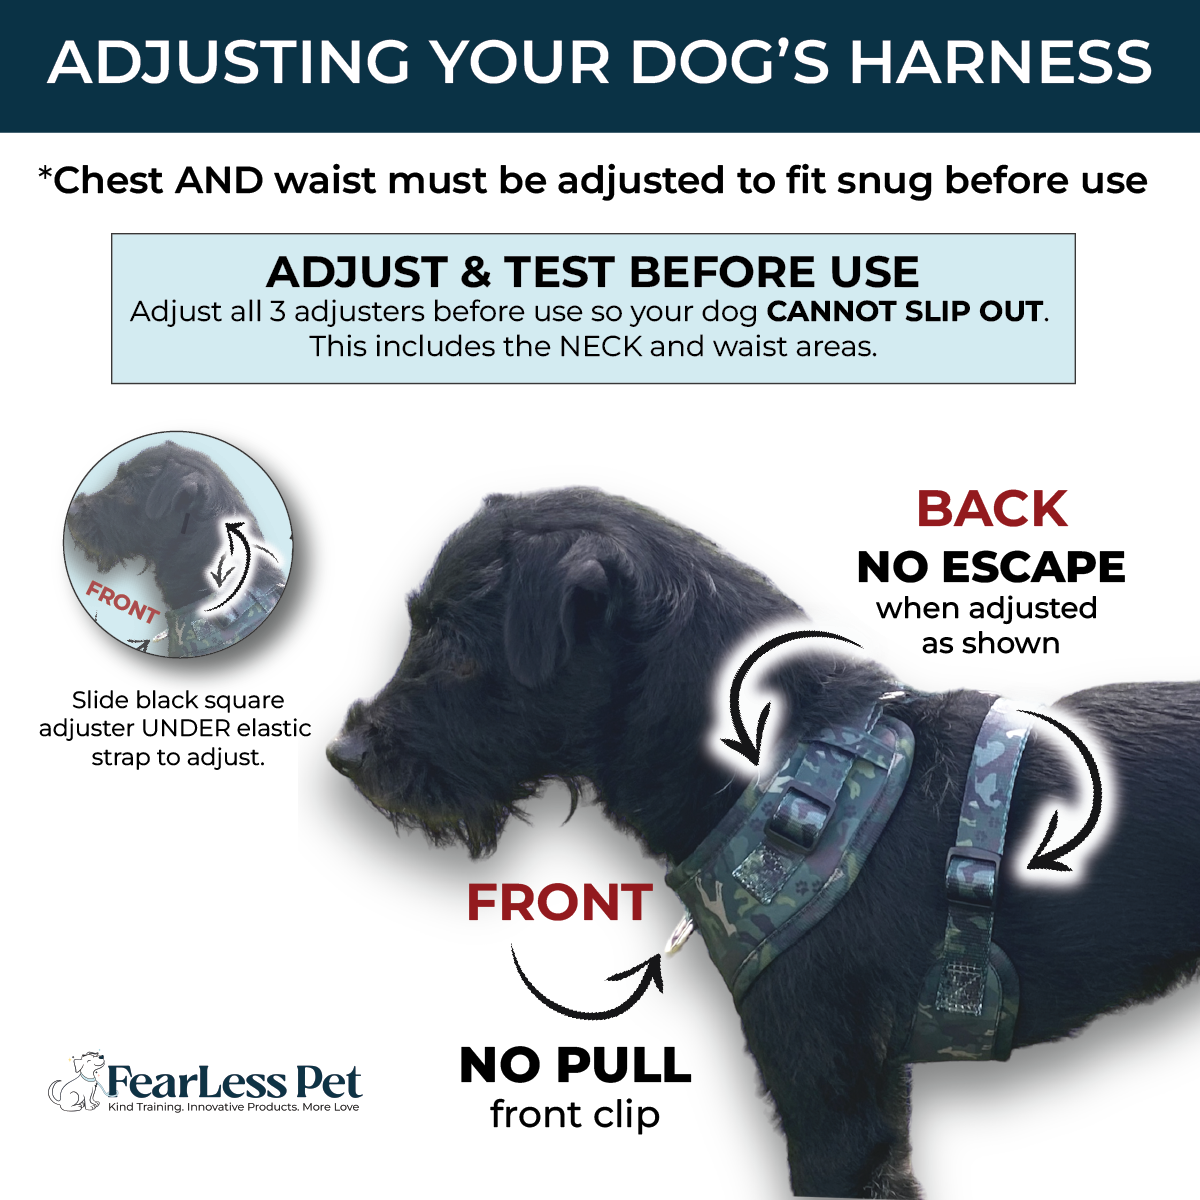 an infographic for an adjustable dog harness from fearless pet showing it is a no pull dog harness for small dogs and a no escape dog harness for small and medium dogs